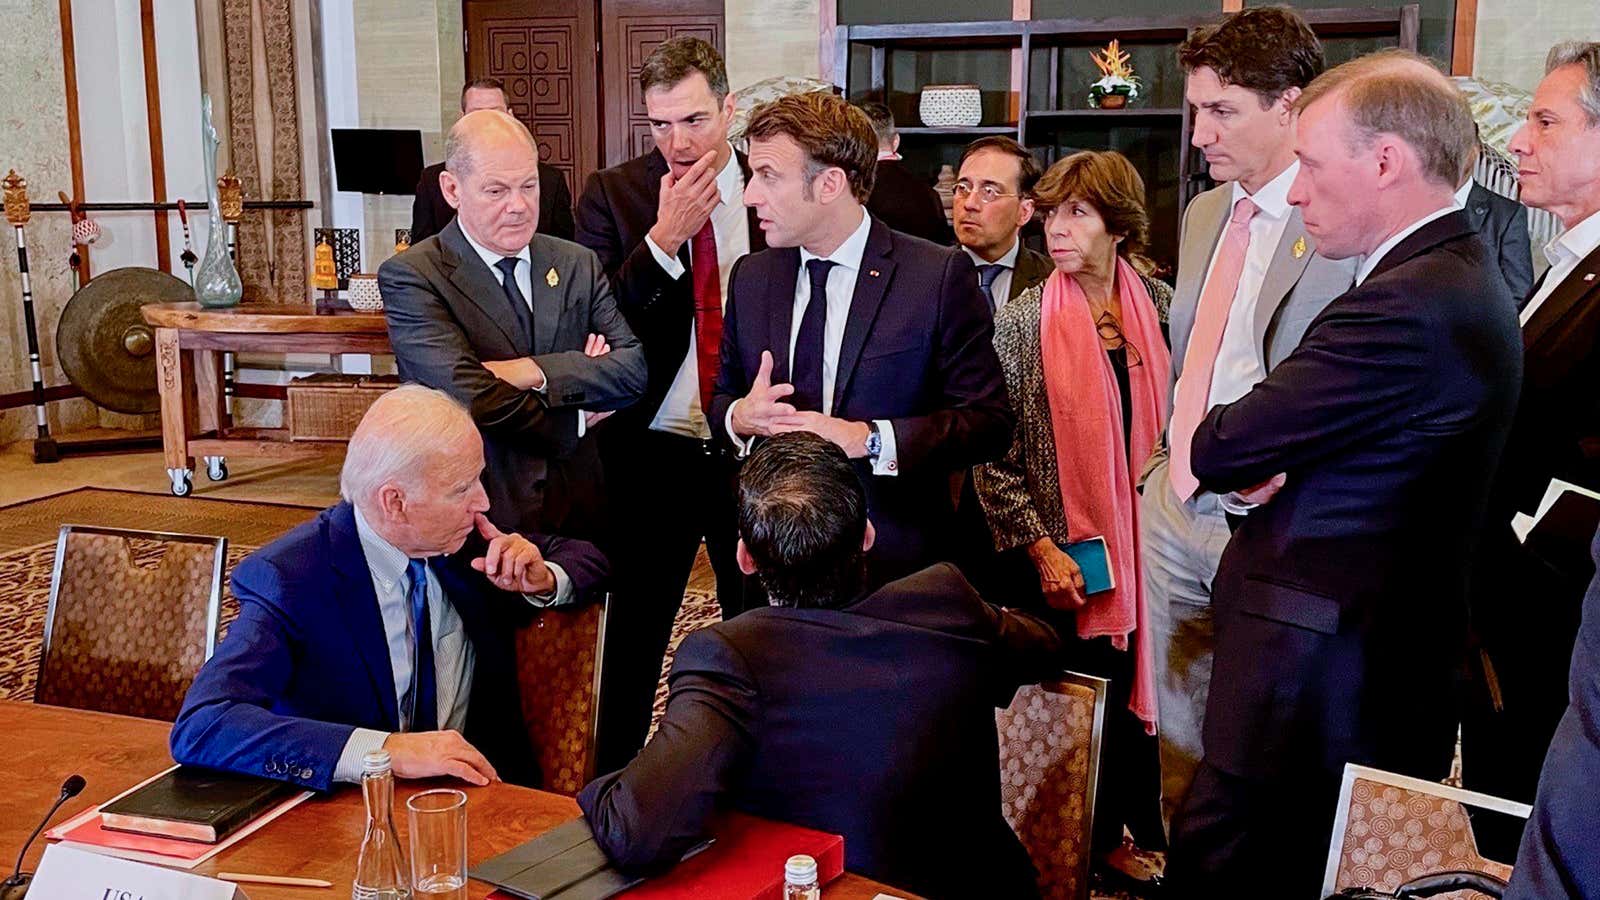 (L-R) US President Joe Biden, German Chancellor Olaf Scholz, Spanish Prime Minister Pedro Sanchez, French President Emmanuel Macron, British Prime Minister Rishi Sunak, Spanish Foreign Minister JosÃ© Manuel Albares Bueno, French Foreign Minister Catherine Colonna, Canadian Prime Minister Justin Trudeau, and US Foreign Minister Antony Blinken (R) talk about the missile strike in Poland as the G20 meetings take place on November 16, 2022 in Nusa Dua, Indonesia.